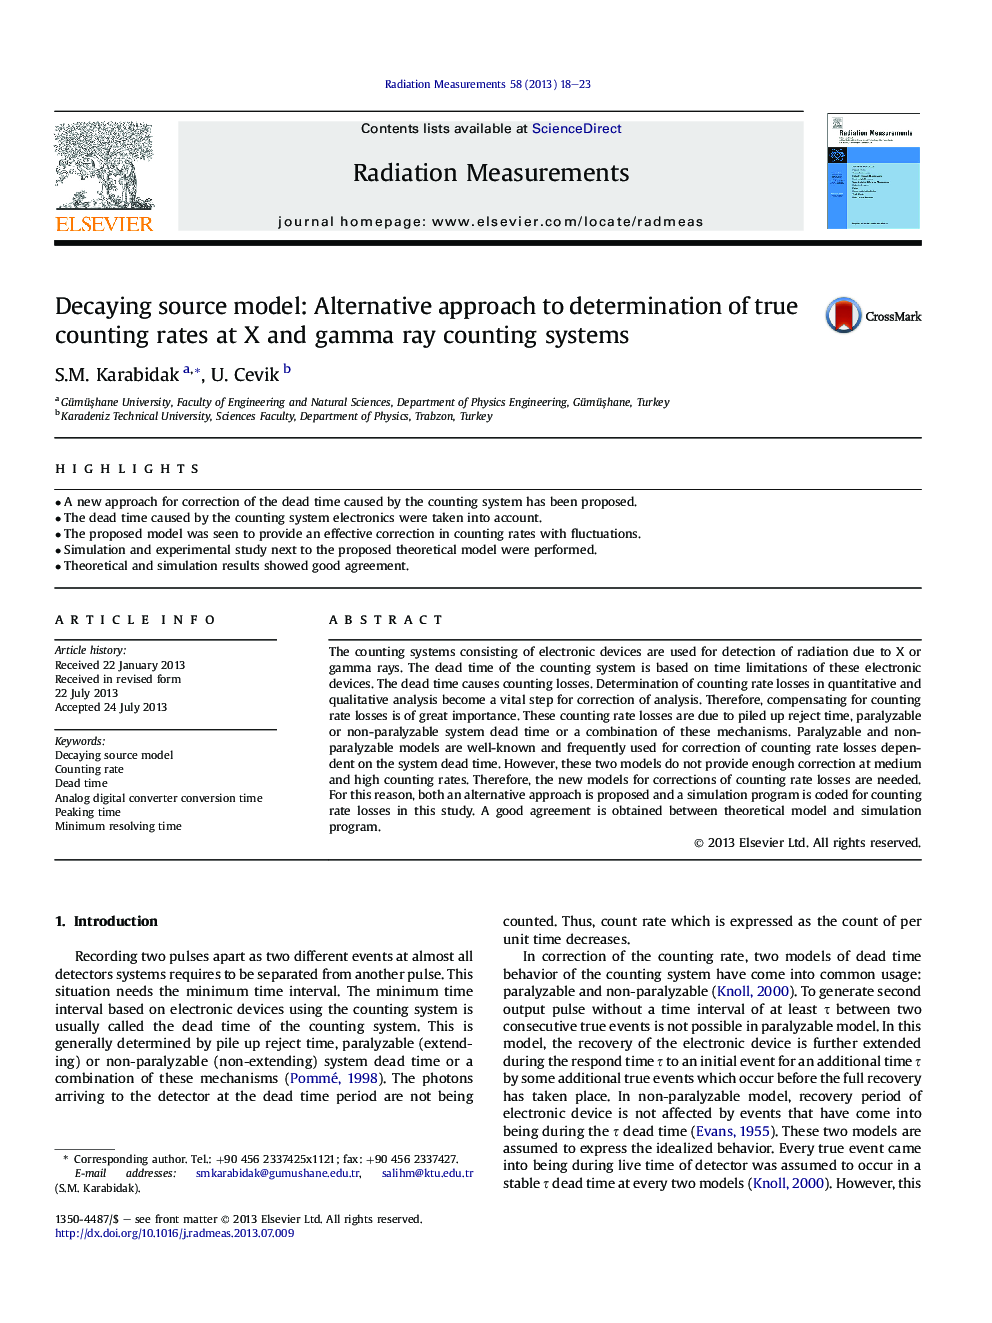 Decaying source model: Alternative approach to determination of true counting rates at X and gamma ray counting systems